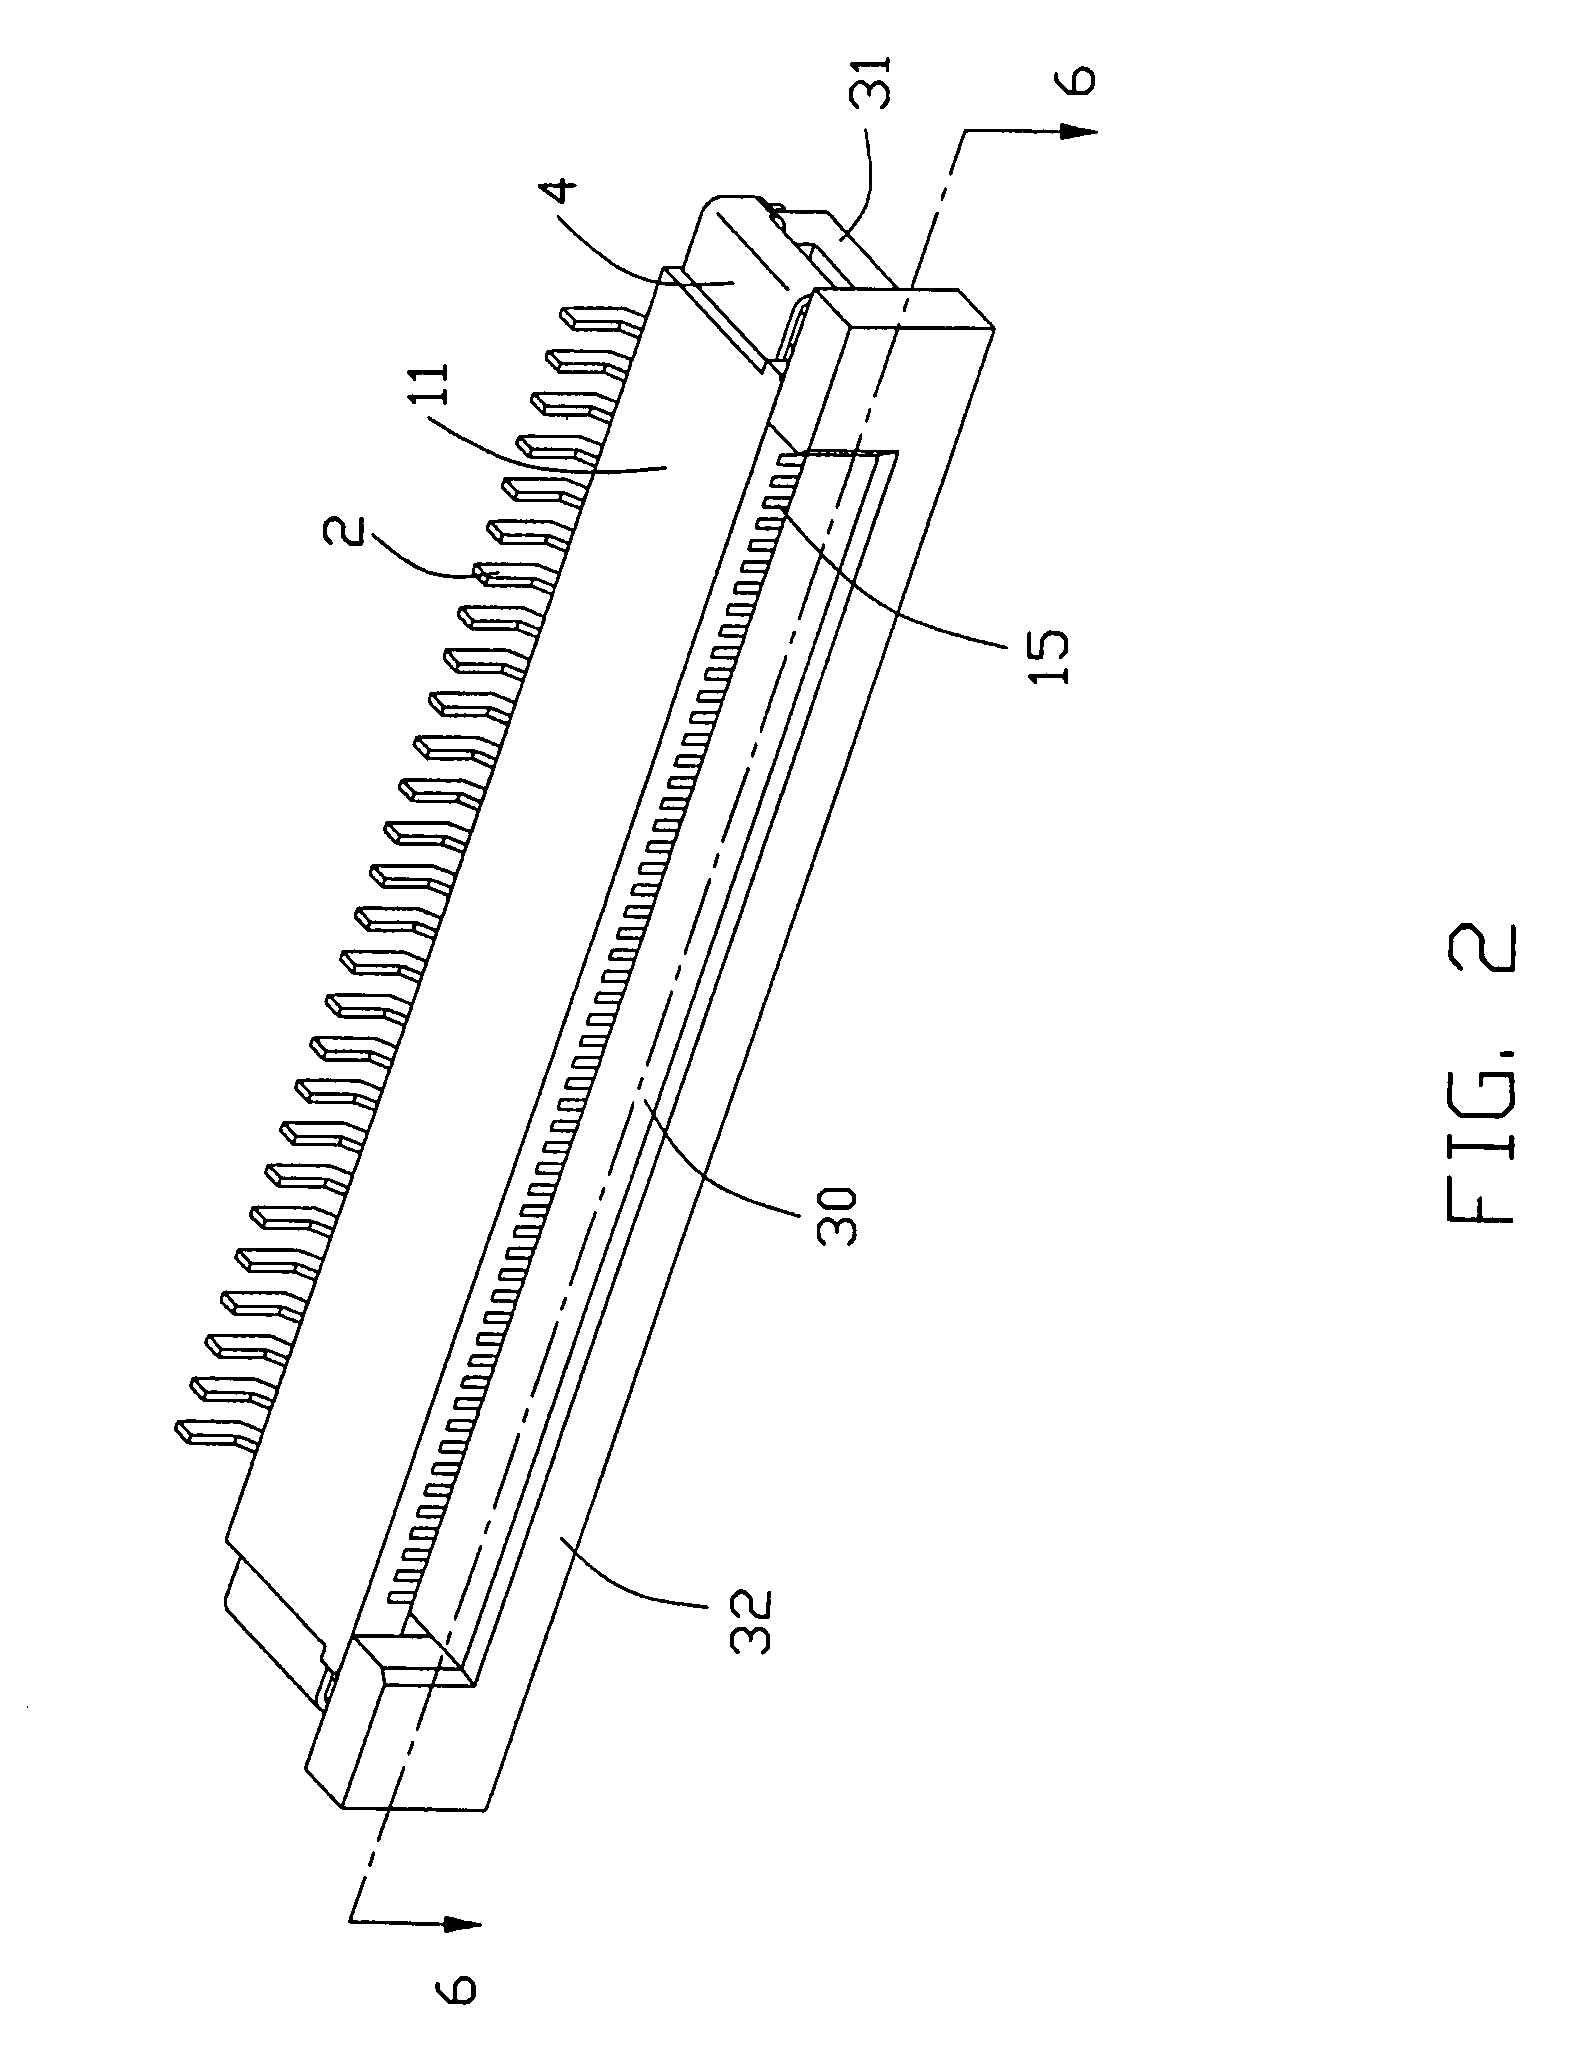 Electrical connector with latching member